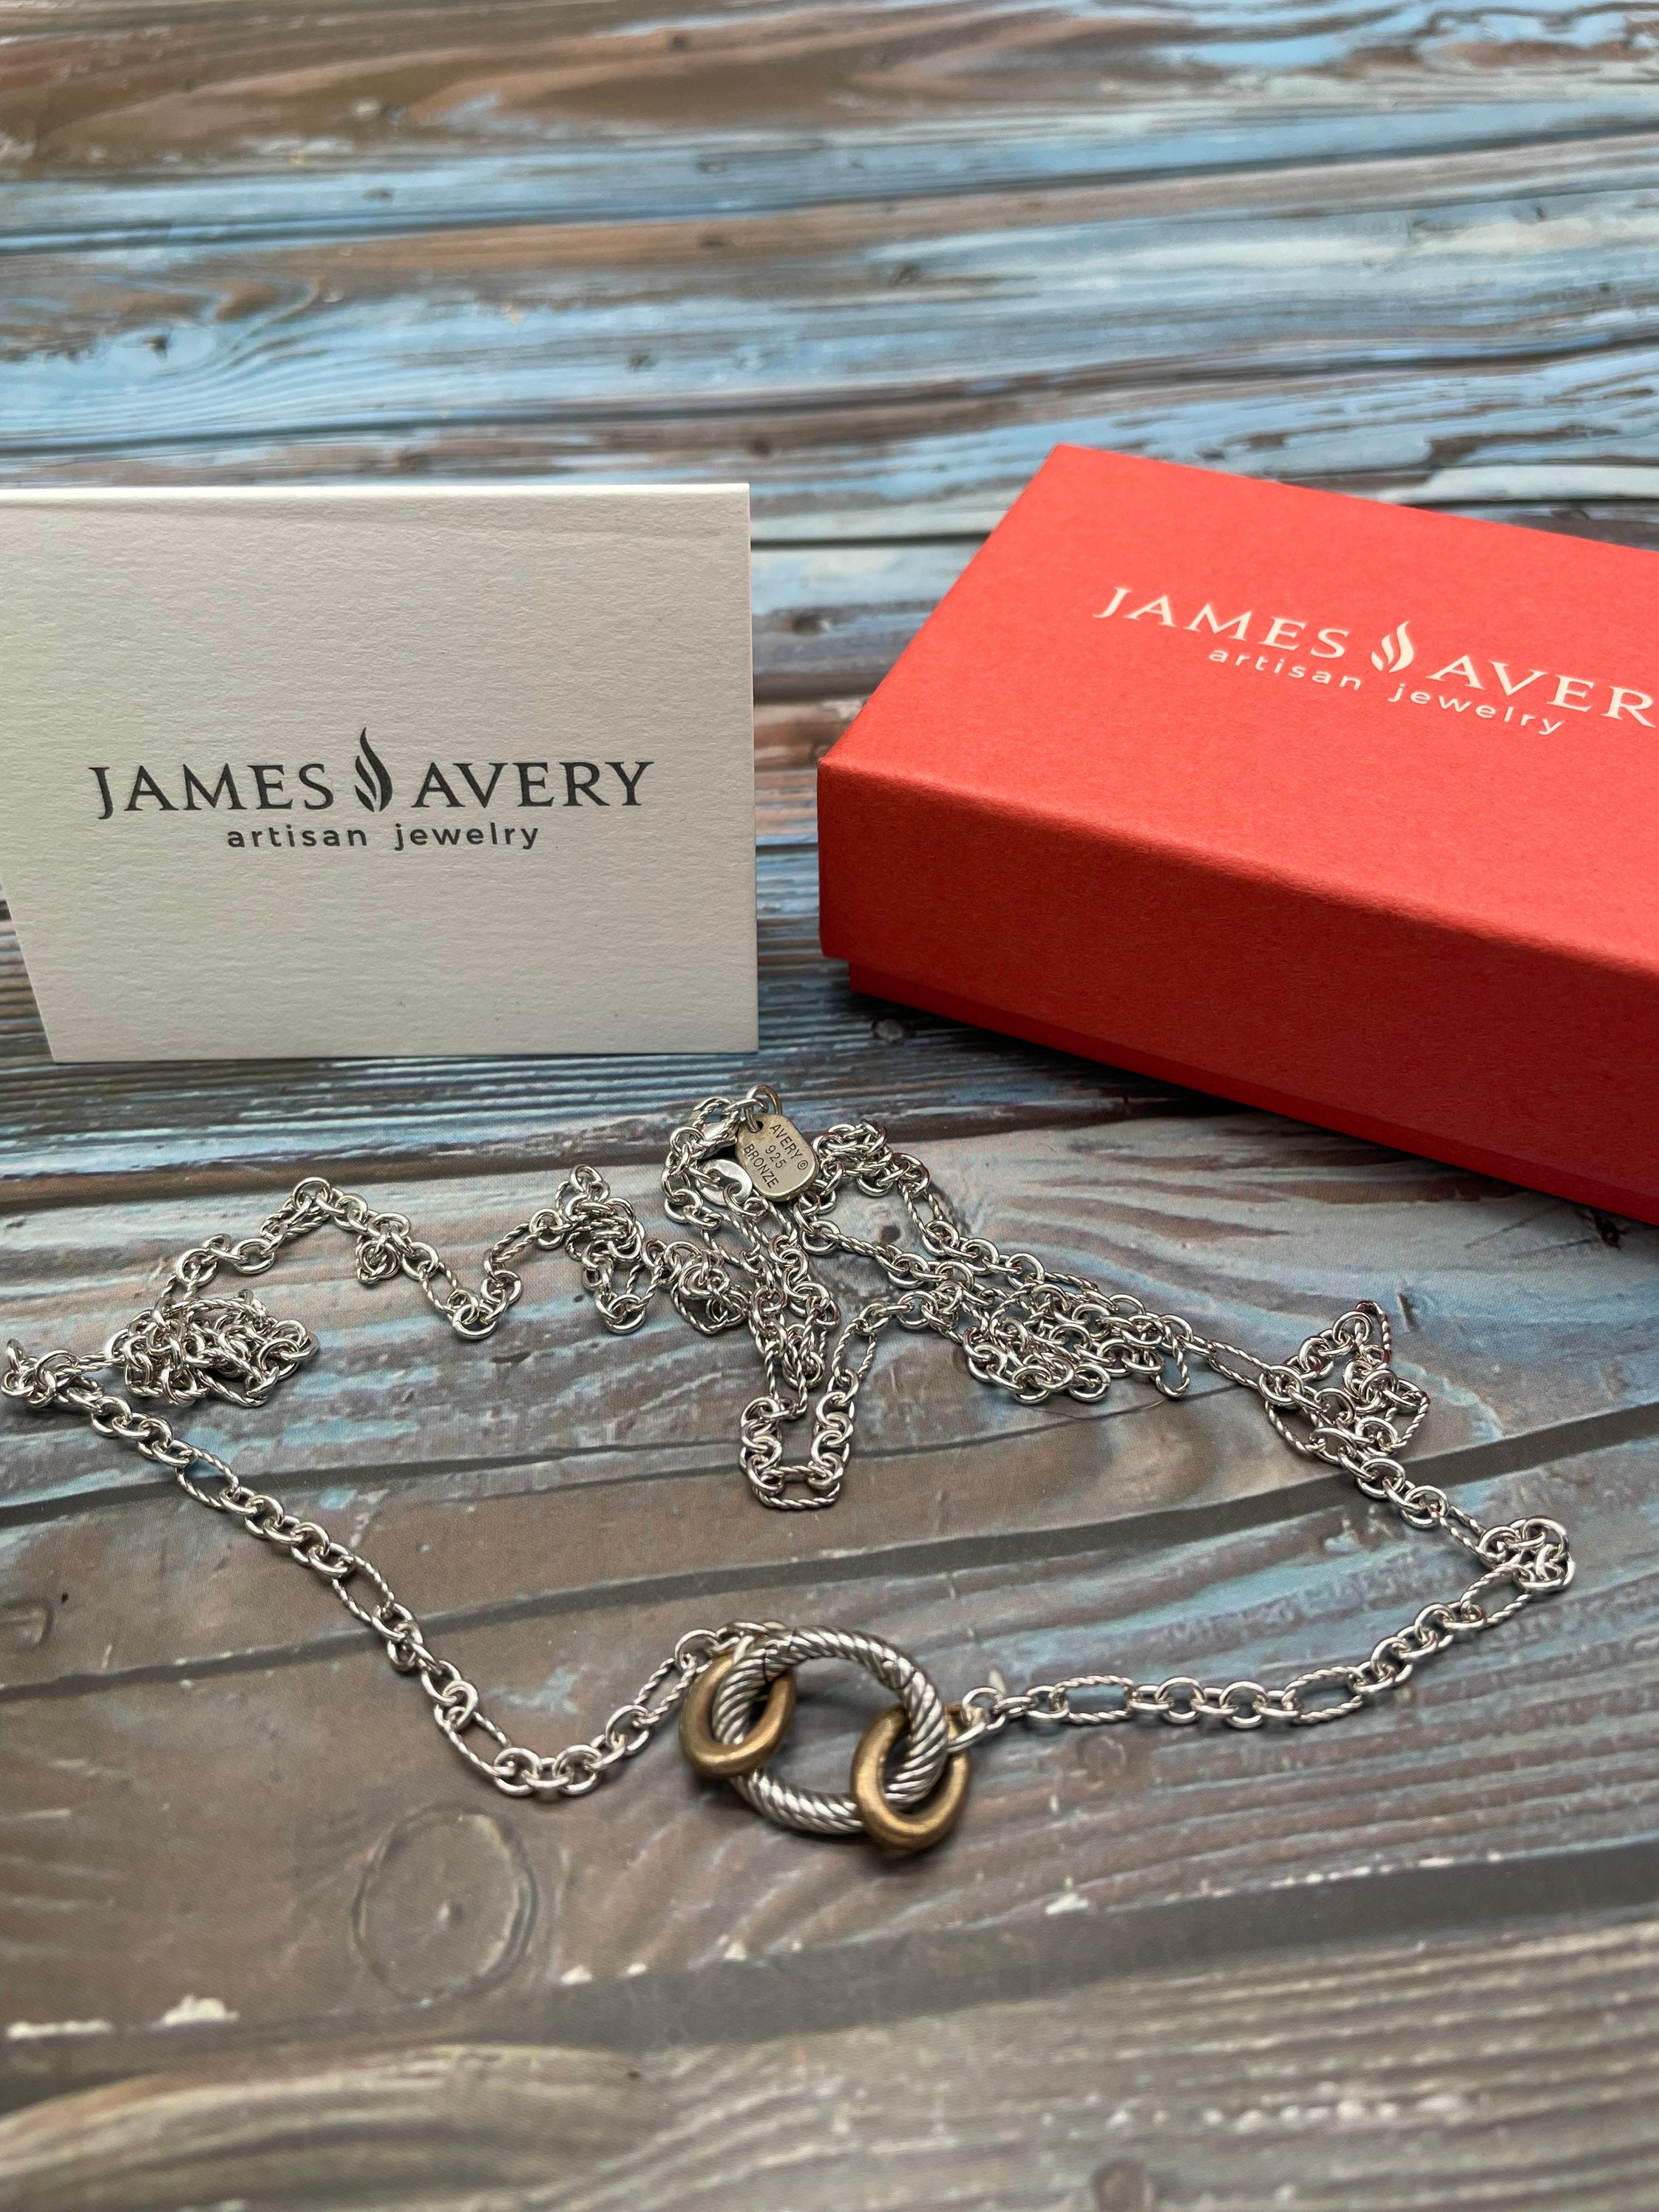 James Avery Beaded Changeable Charm Holder Necklace - 24 in.